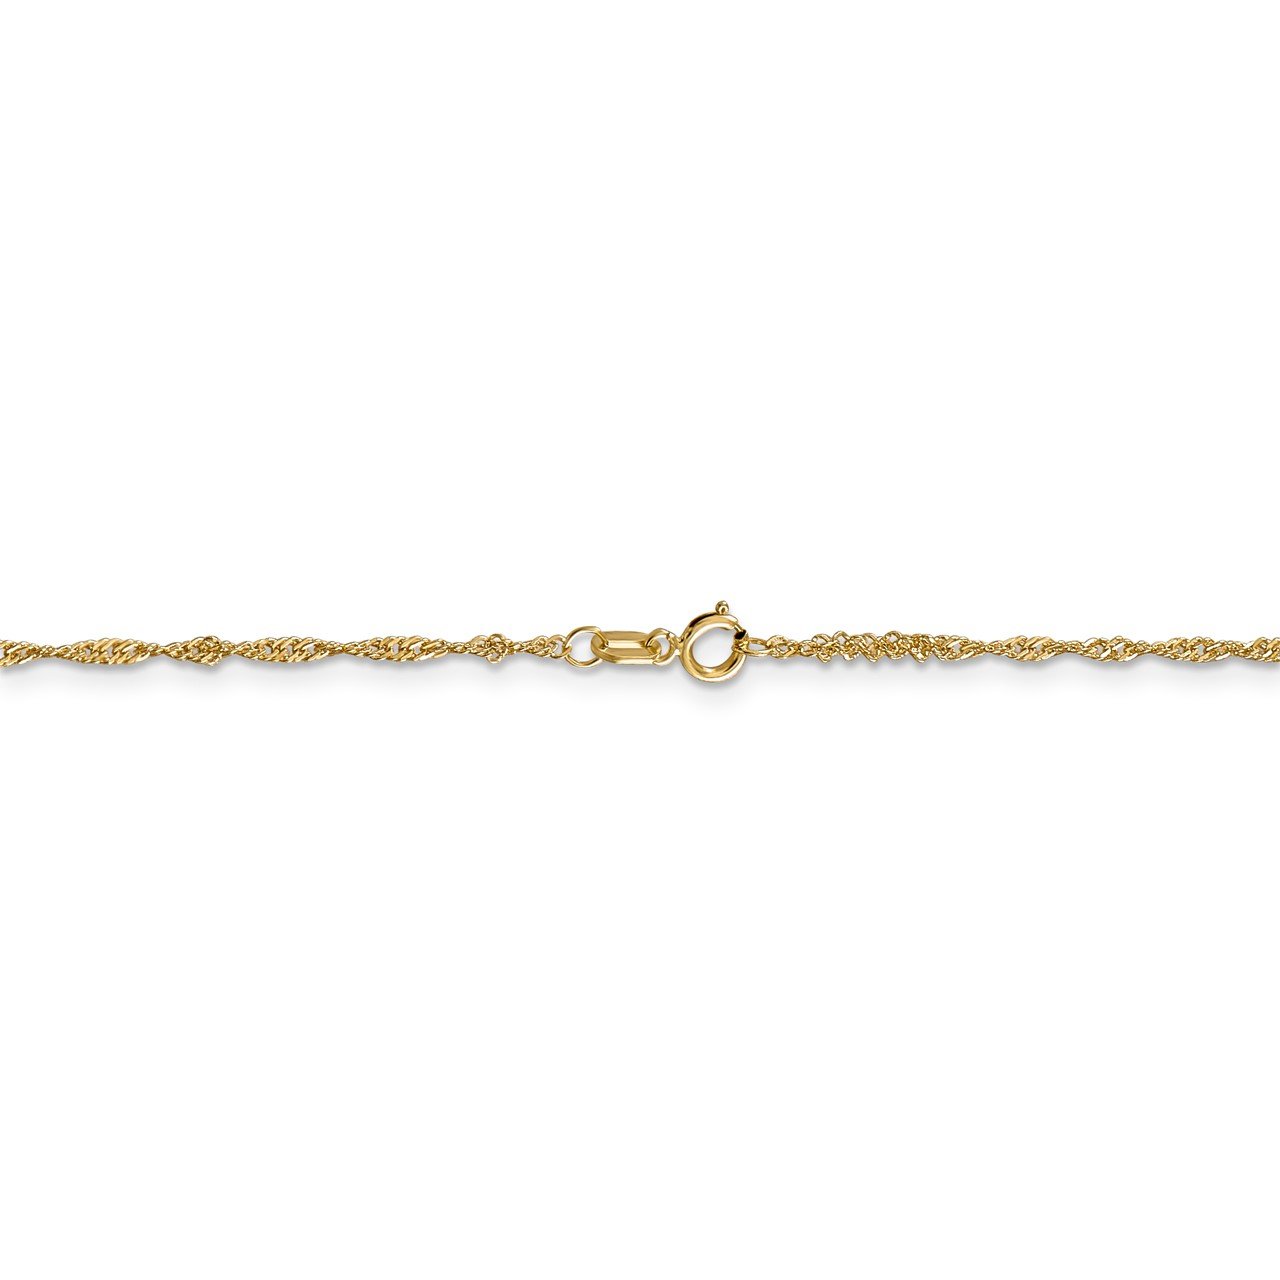 Leslie's 14K 1.3mm Singapore with Lock Chain-2